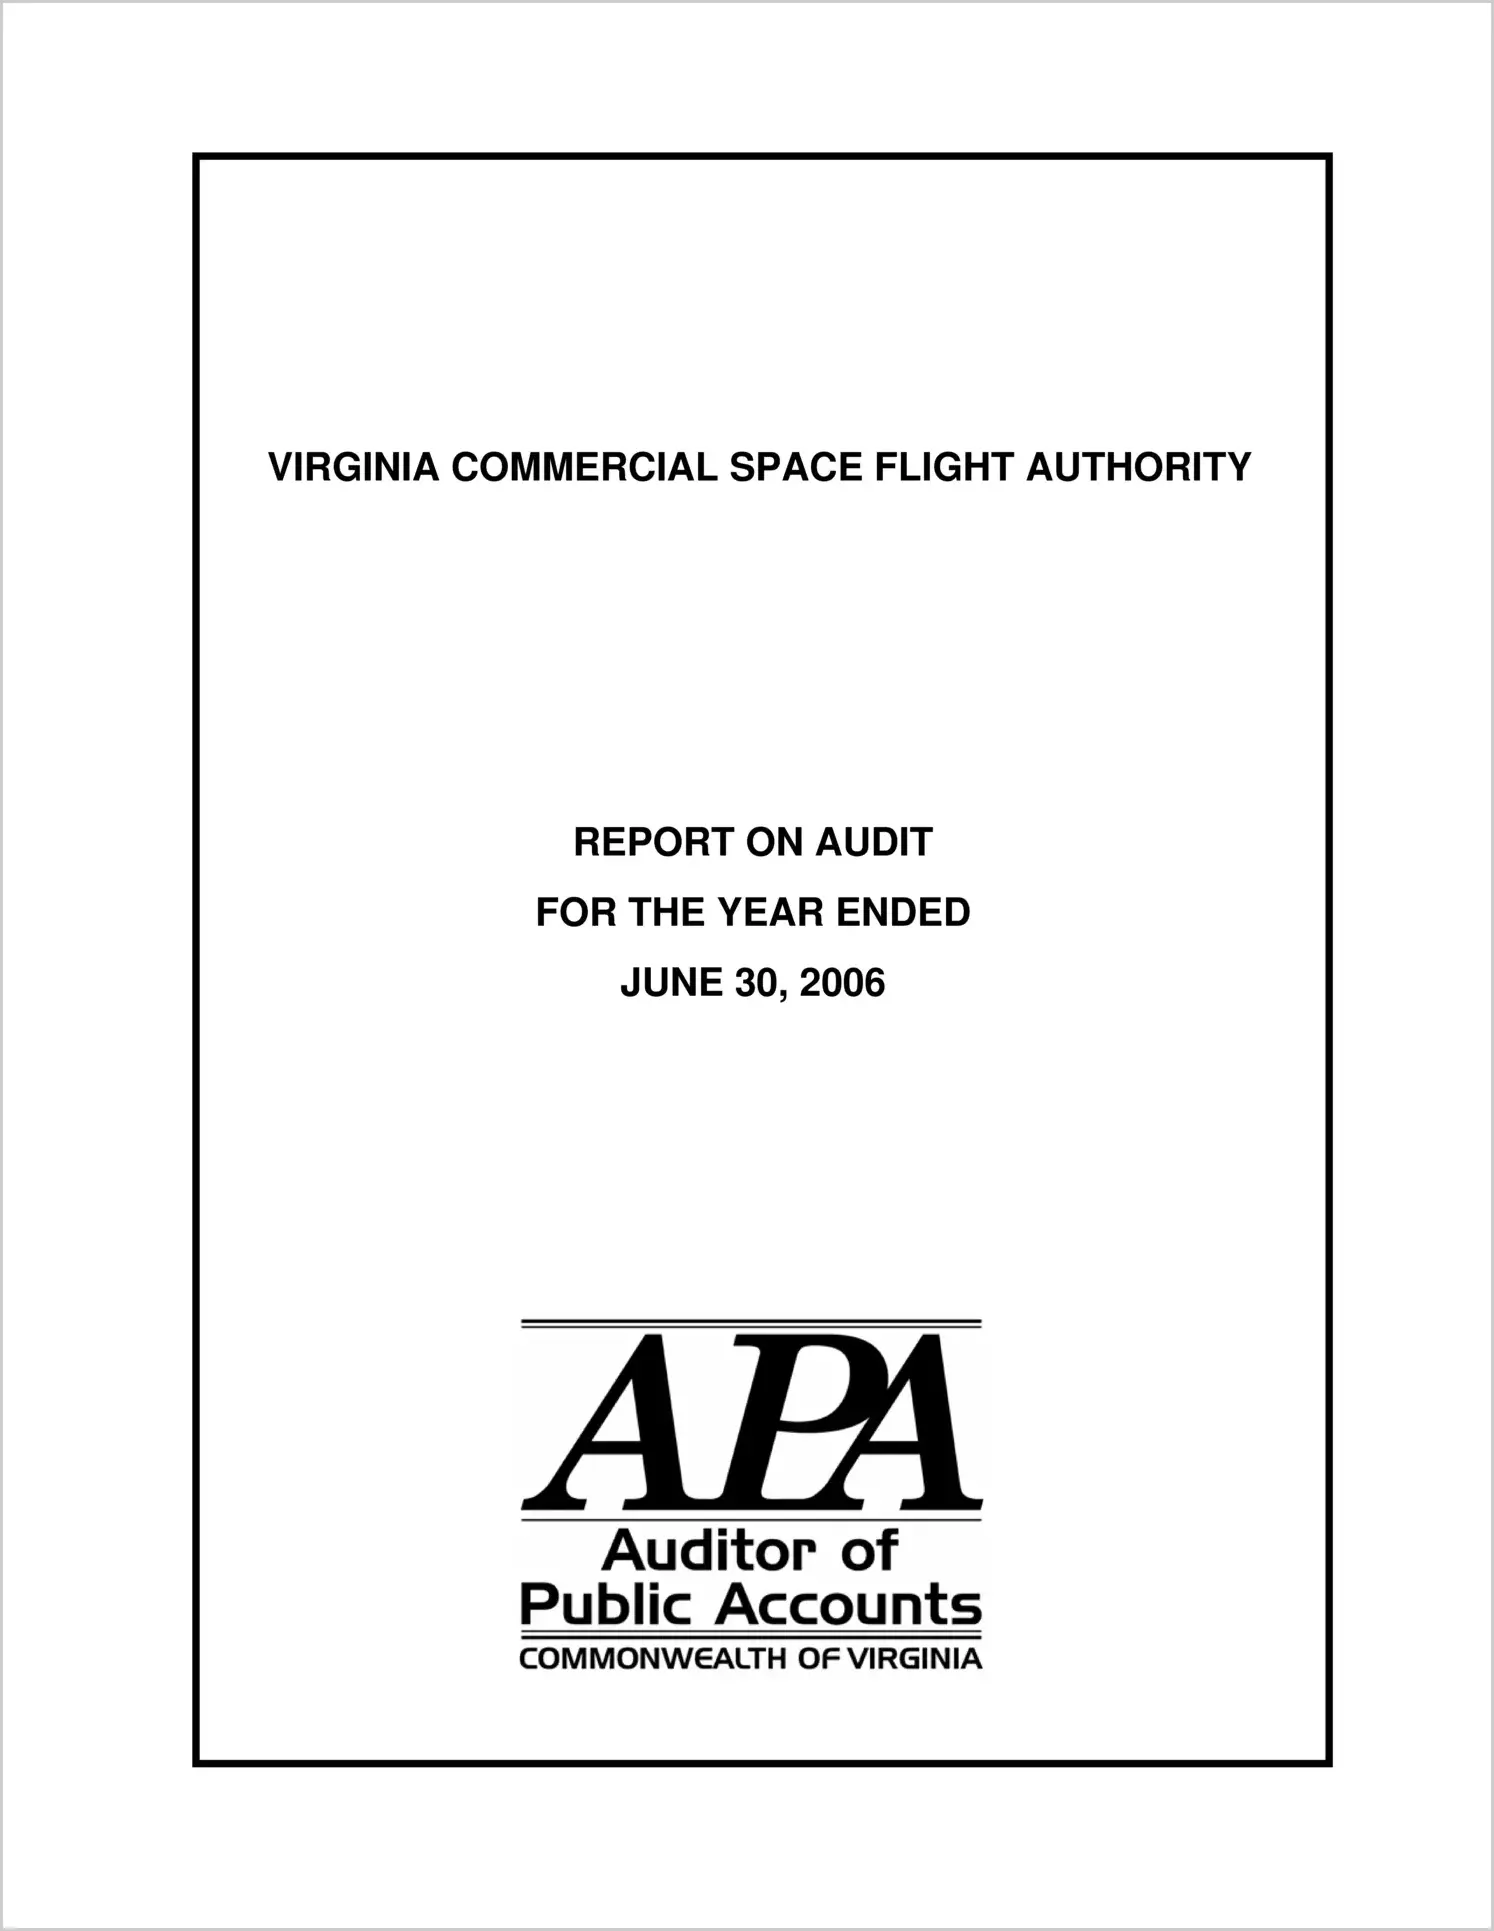 Virginia Commercial Space Flight Authority for the year ended June 30, 2006